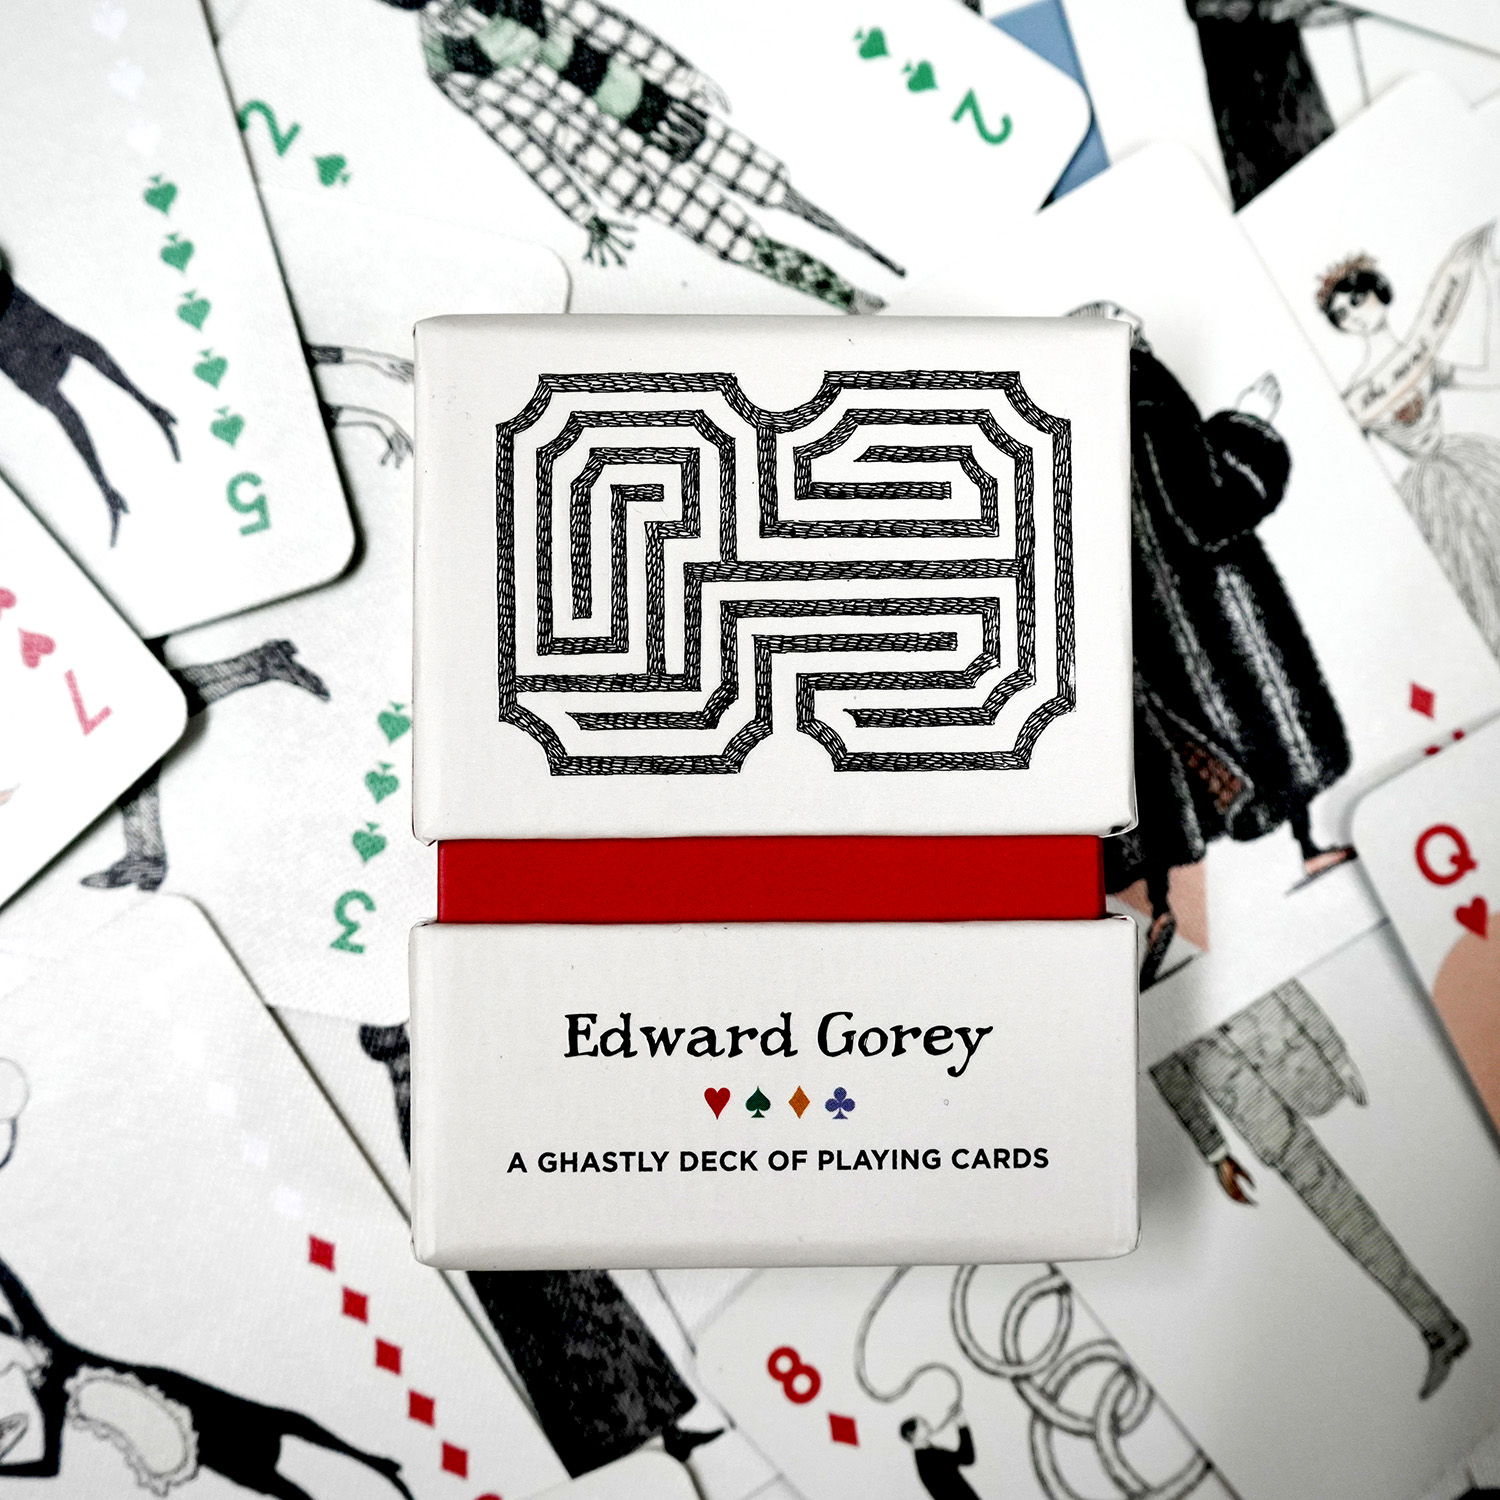  Edward *go- Lee playing cards 